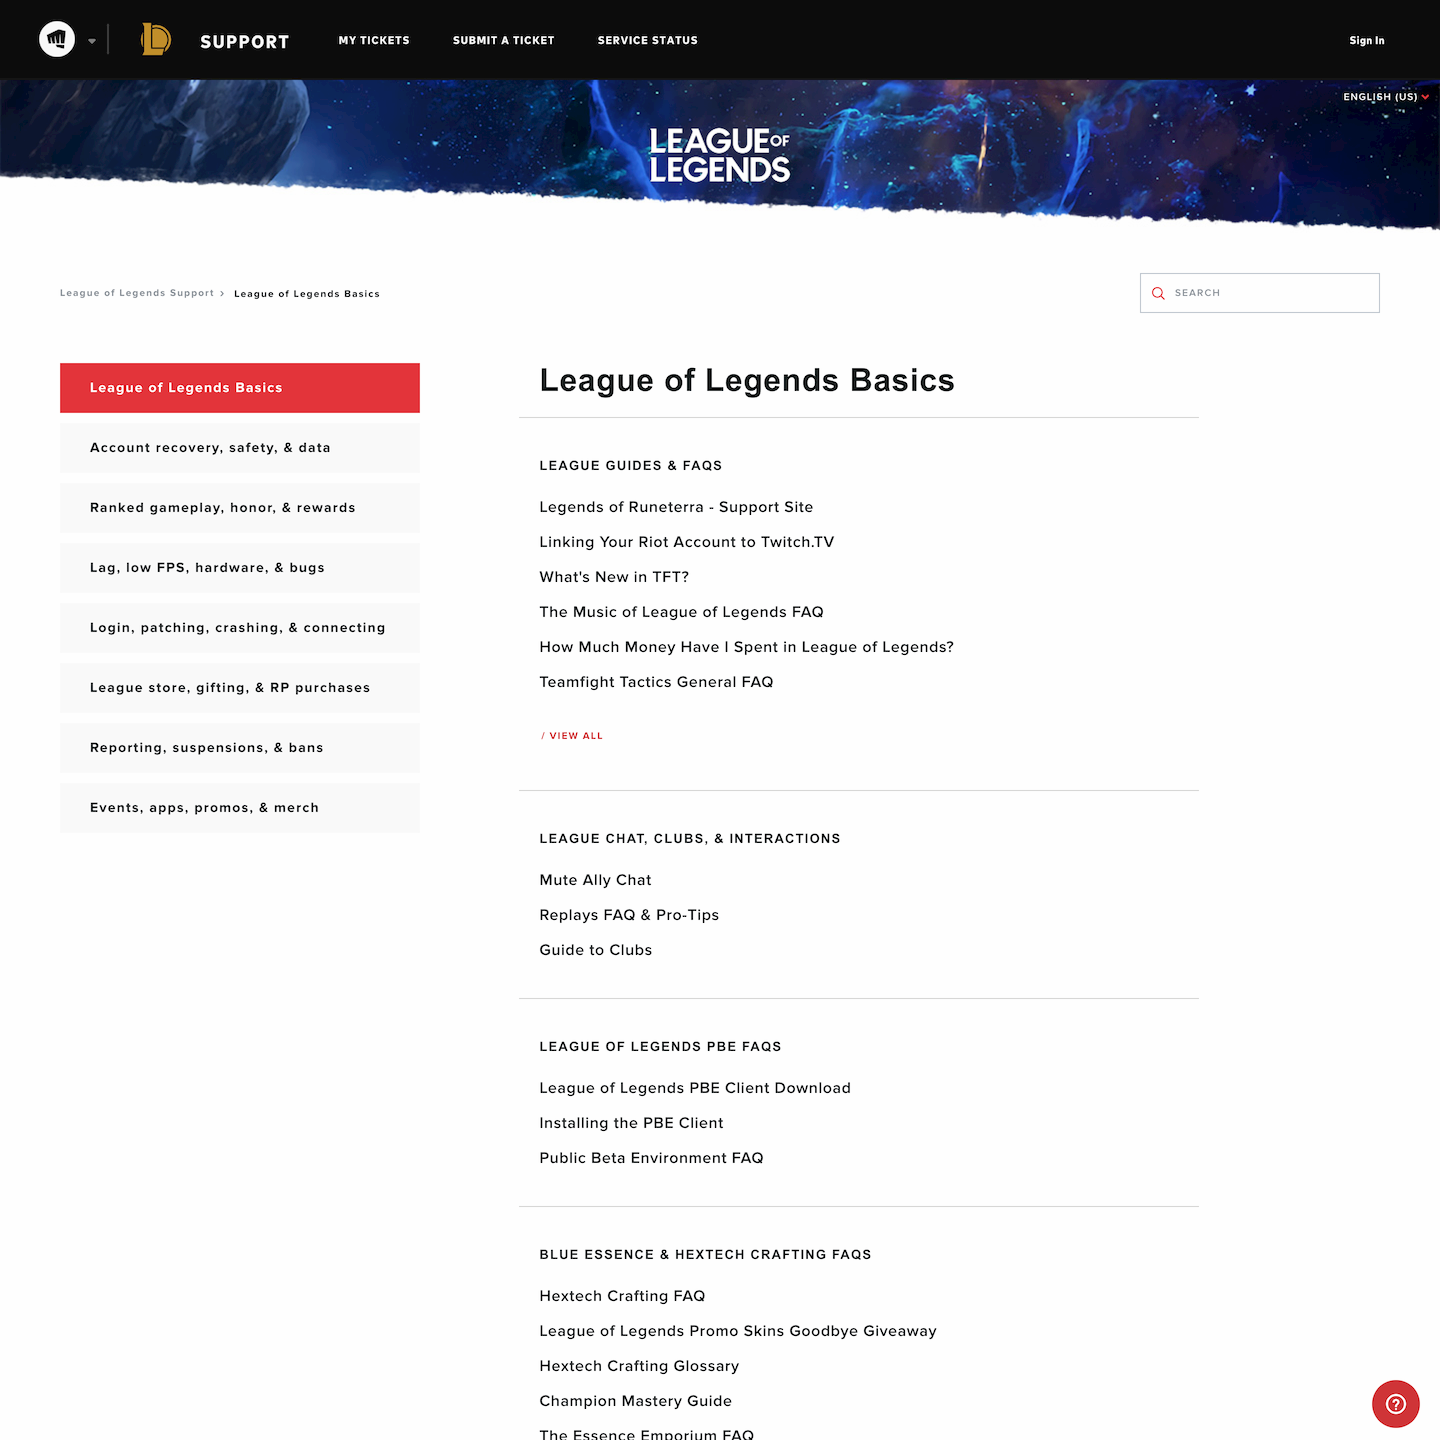 League of Legends Support > My activities My Tickets SEARCH